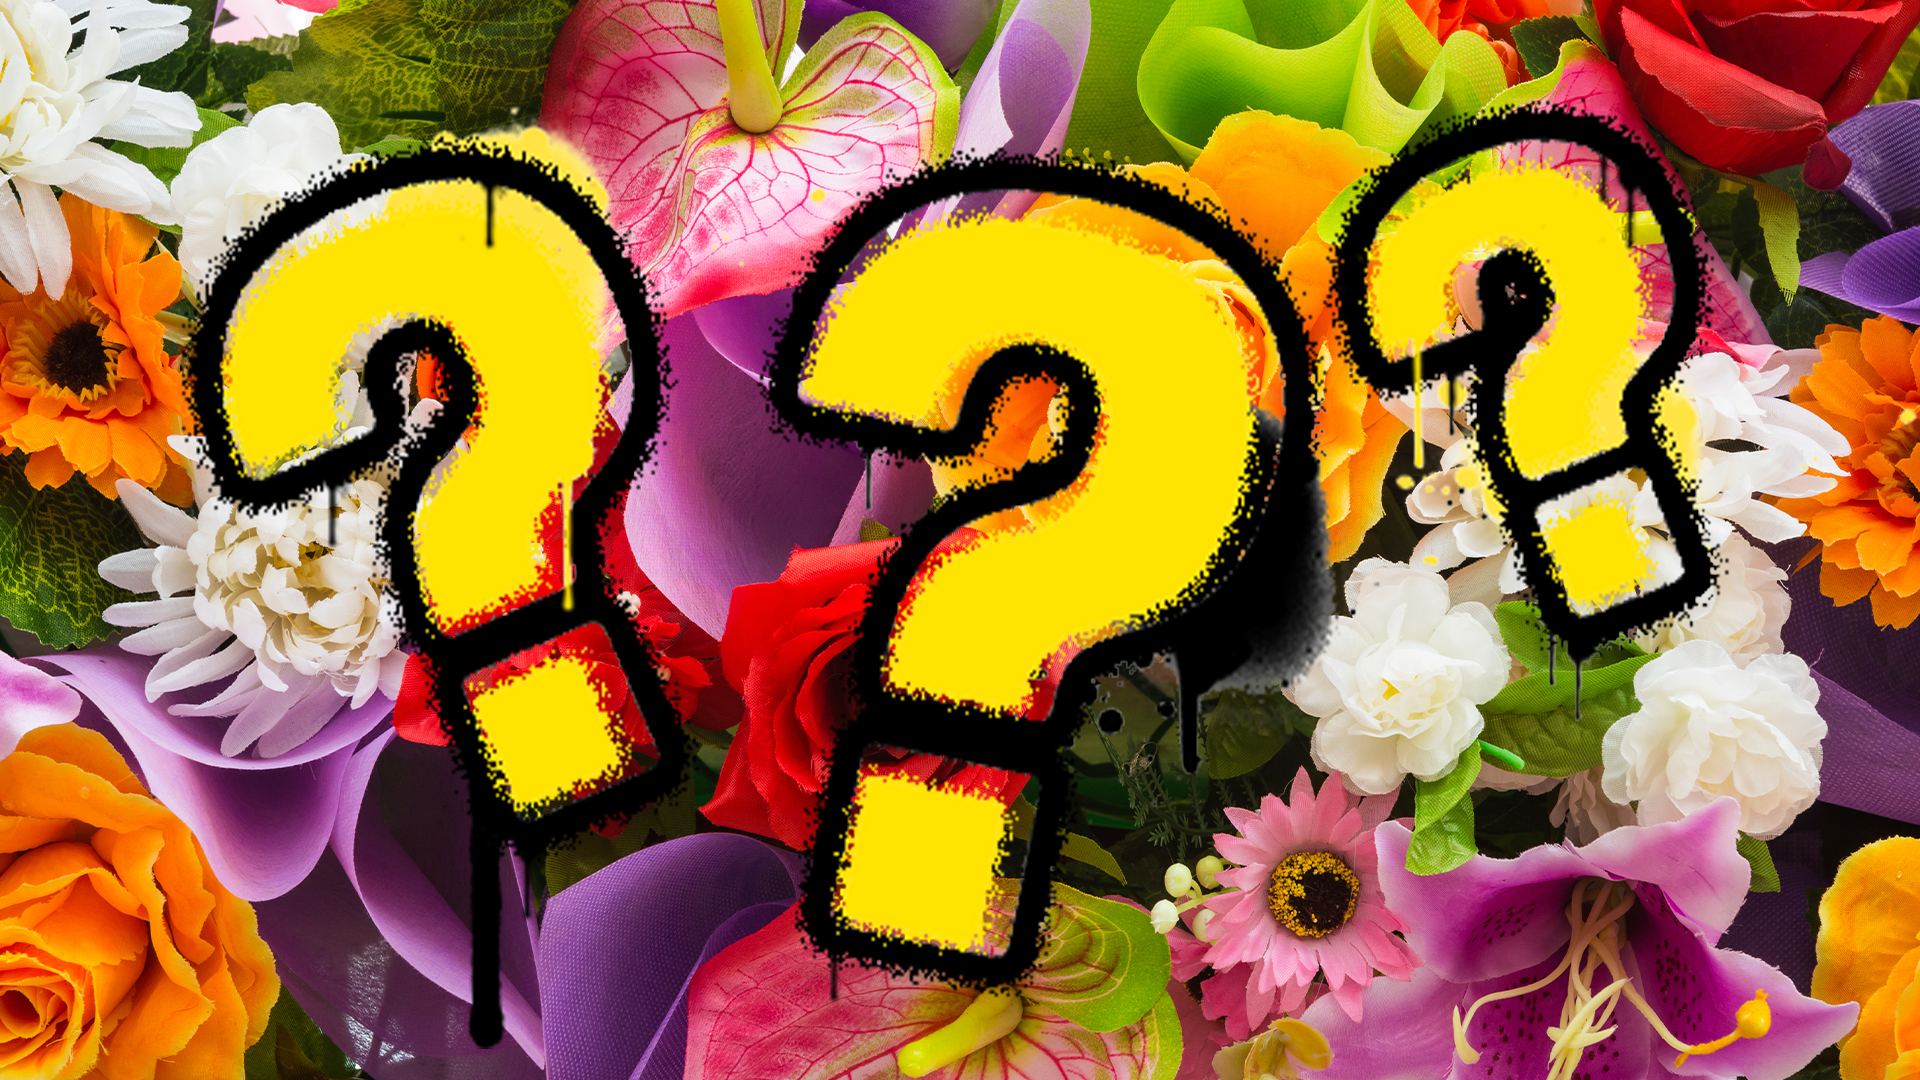 Flowers with graffiti question marks